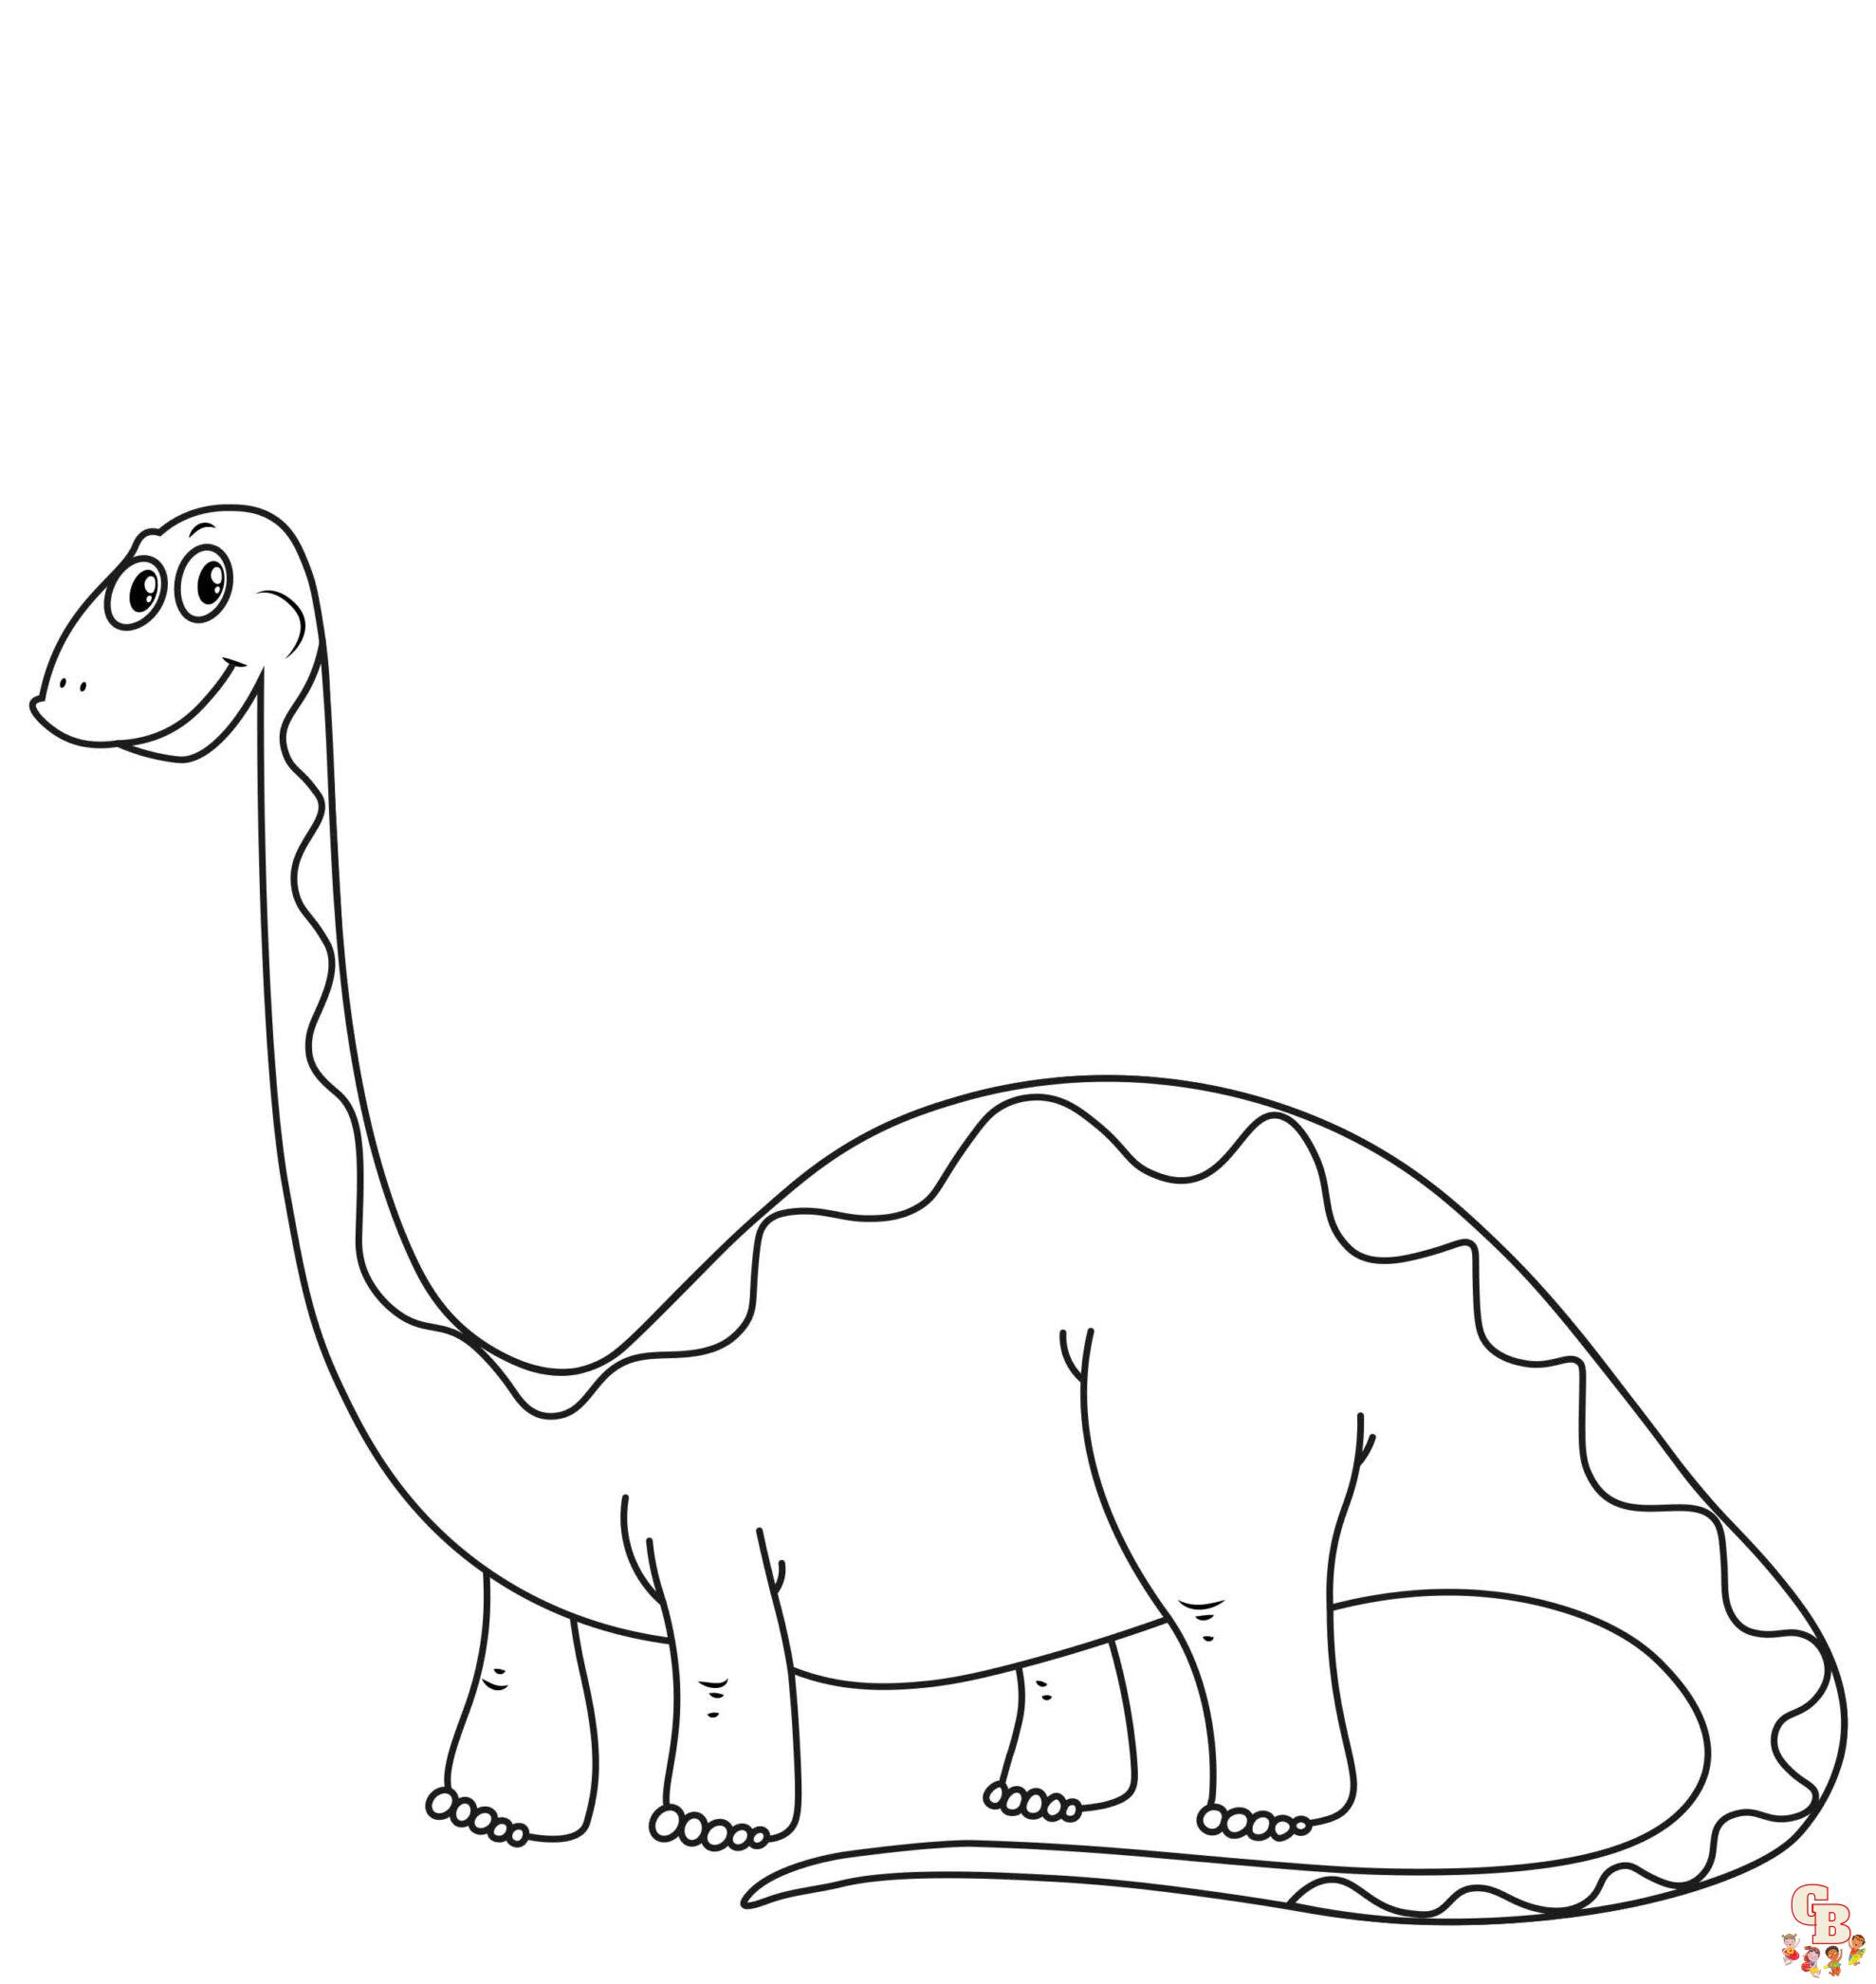 Brontosaurus Coloring Pages 8